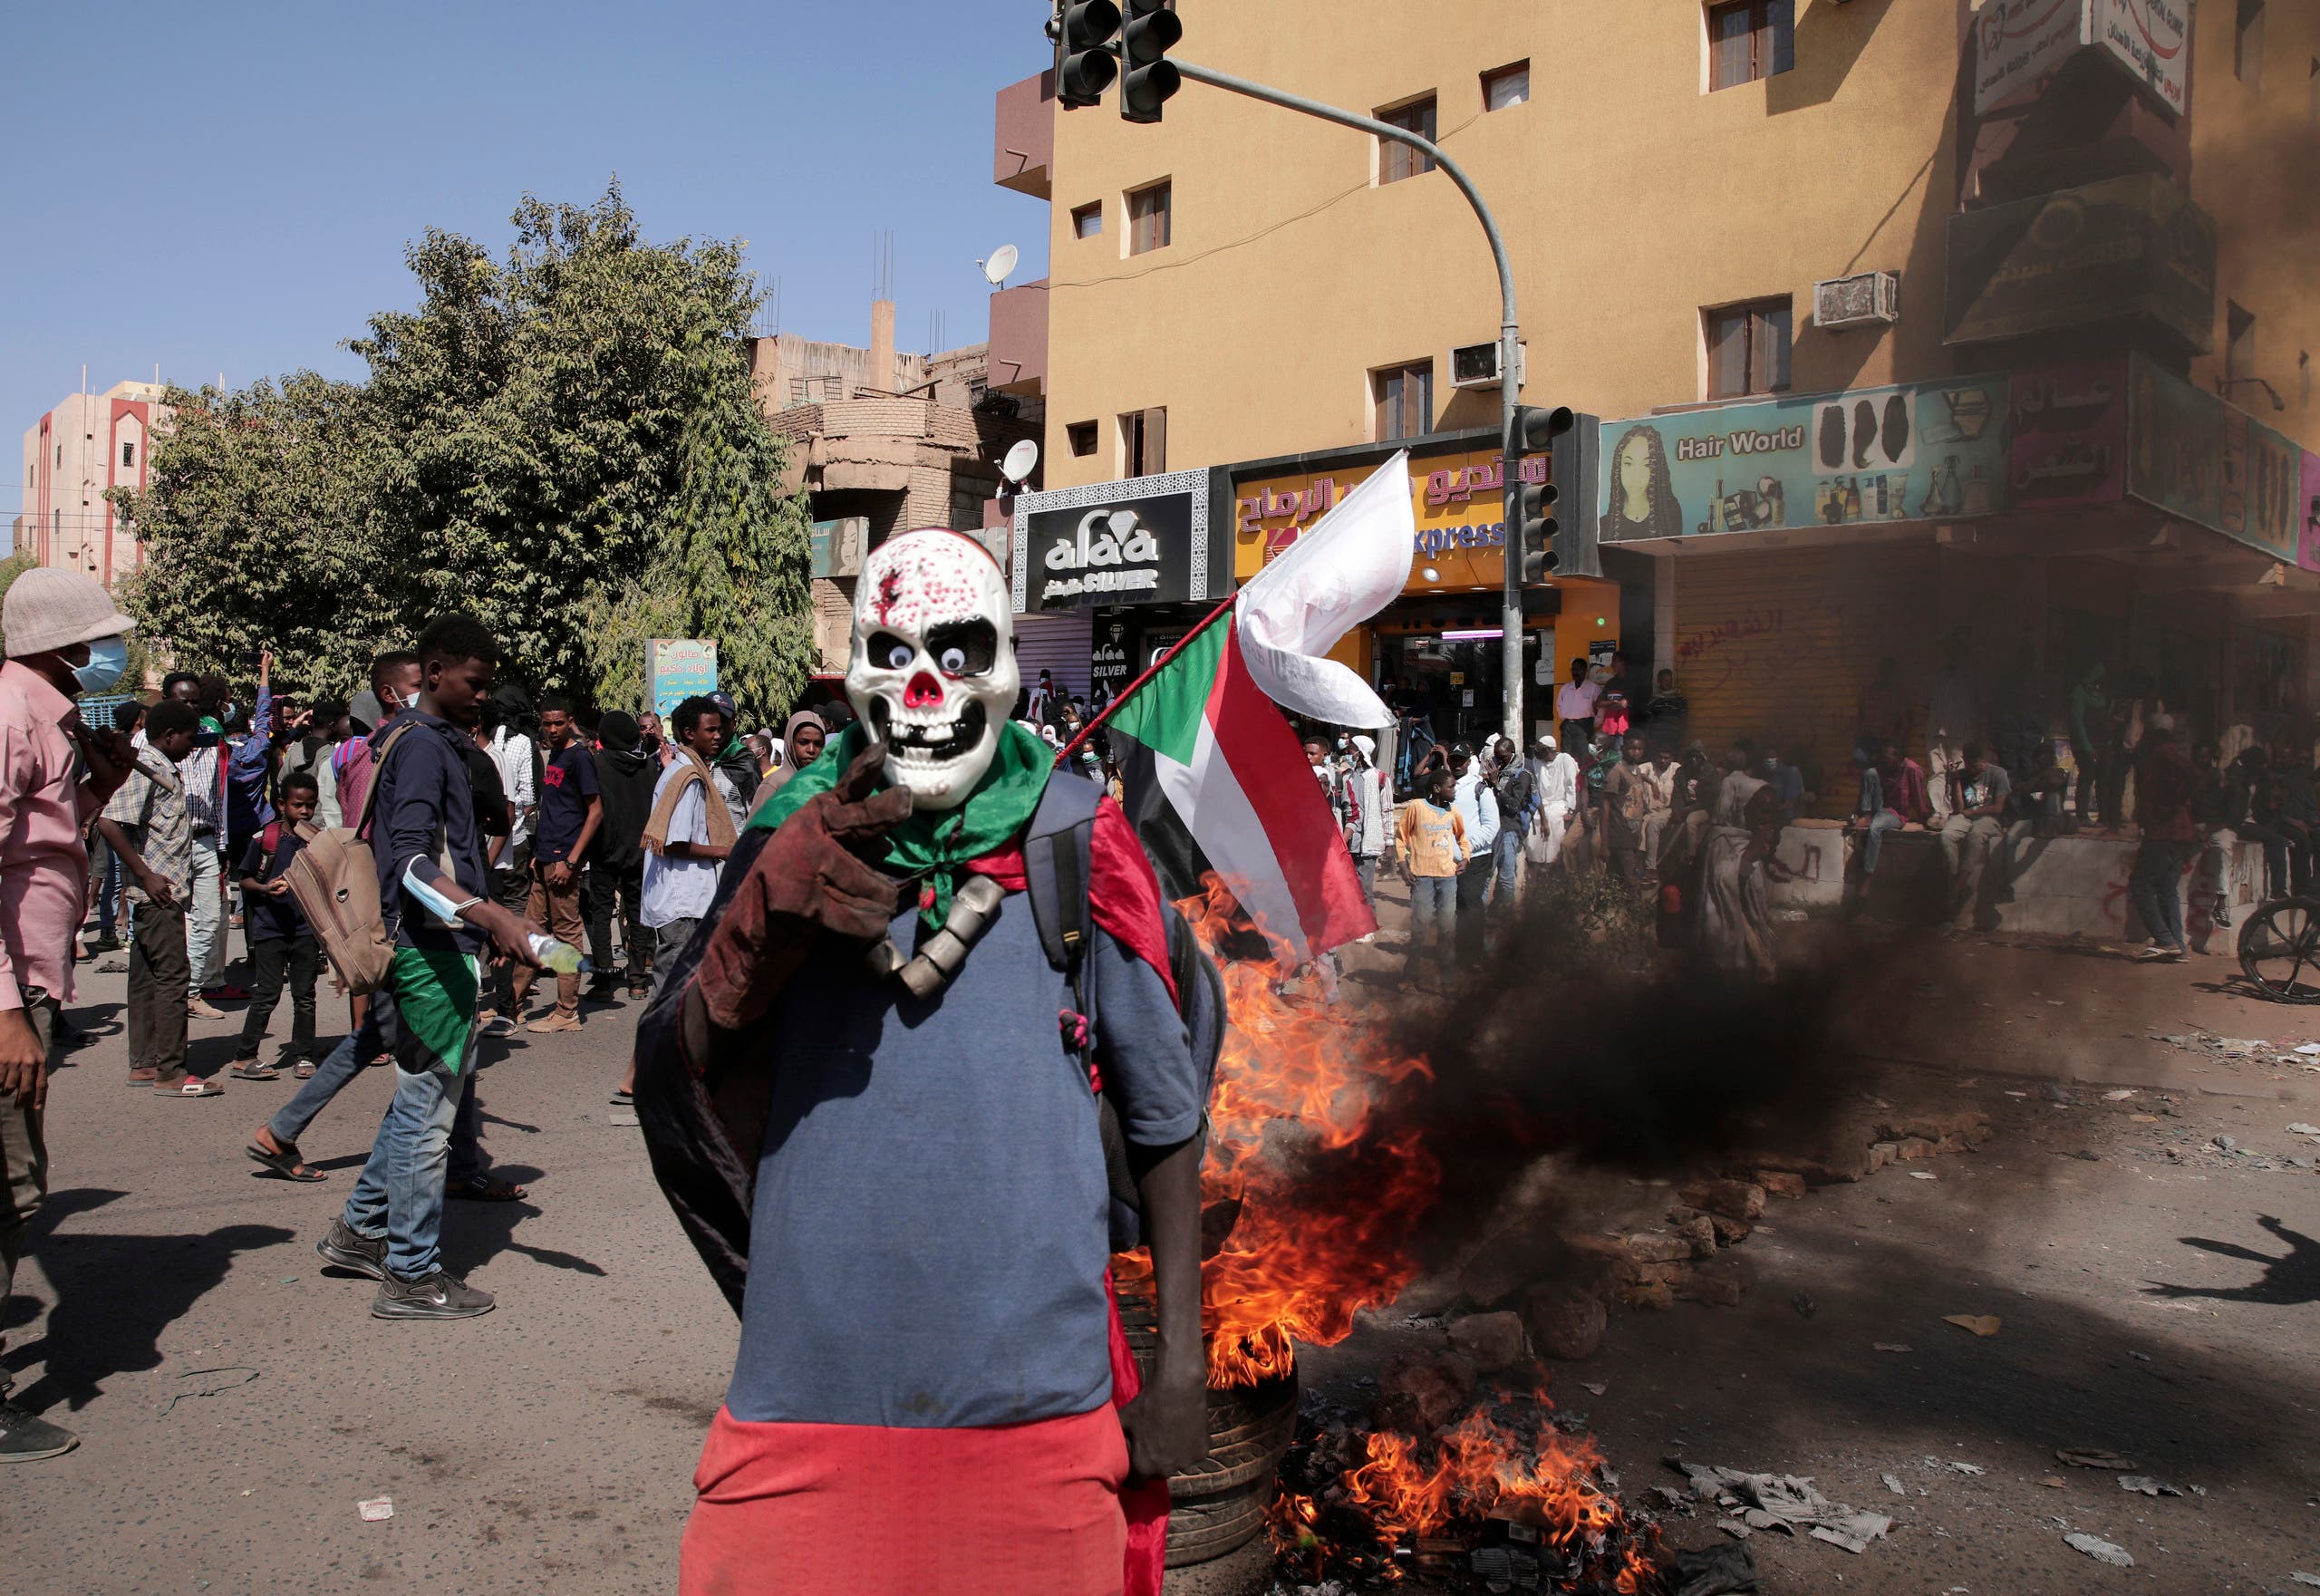 From previous demonstrations in Khartoum 